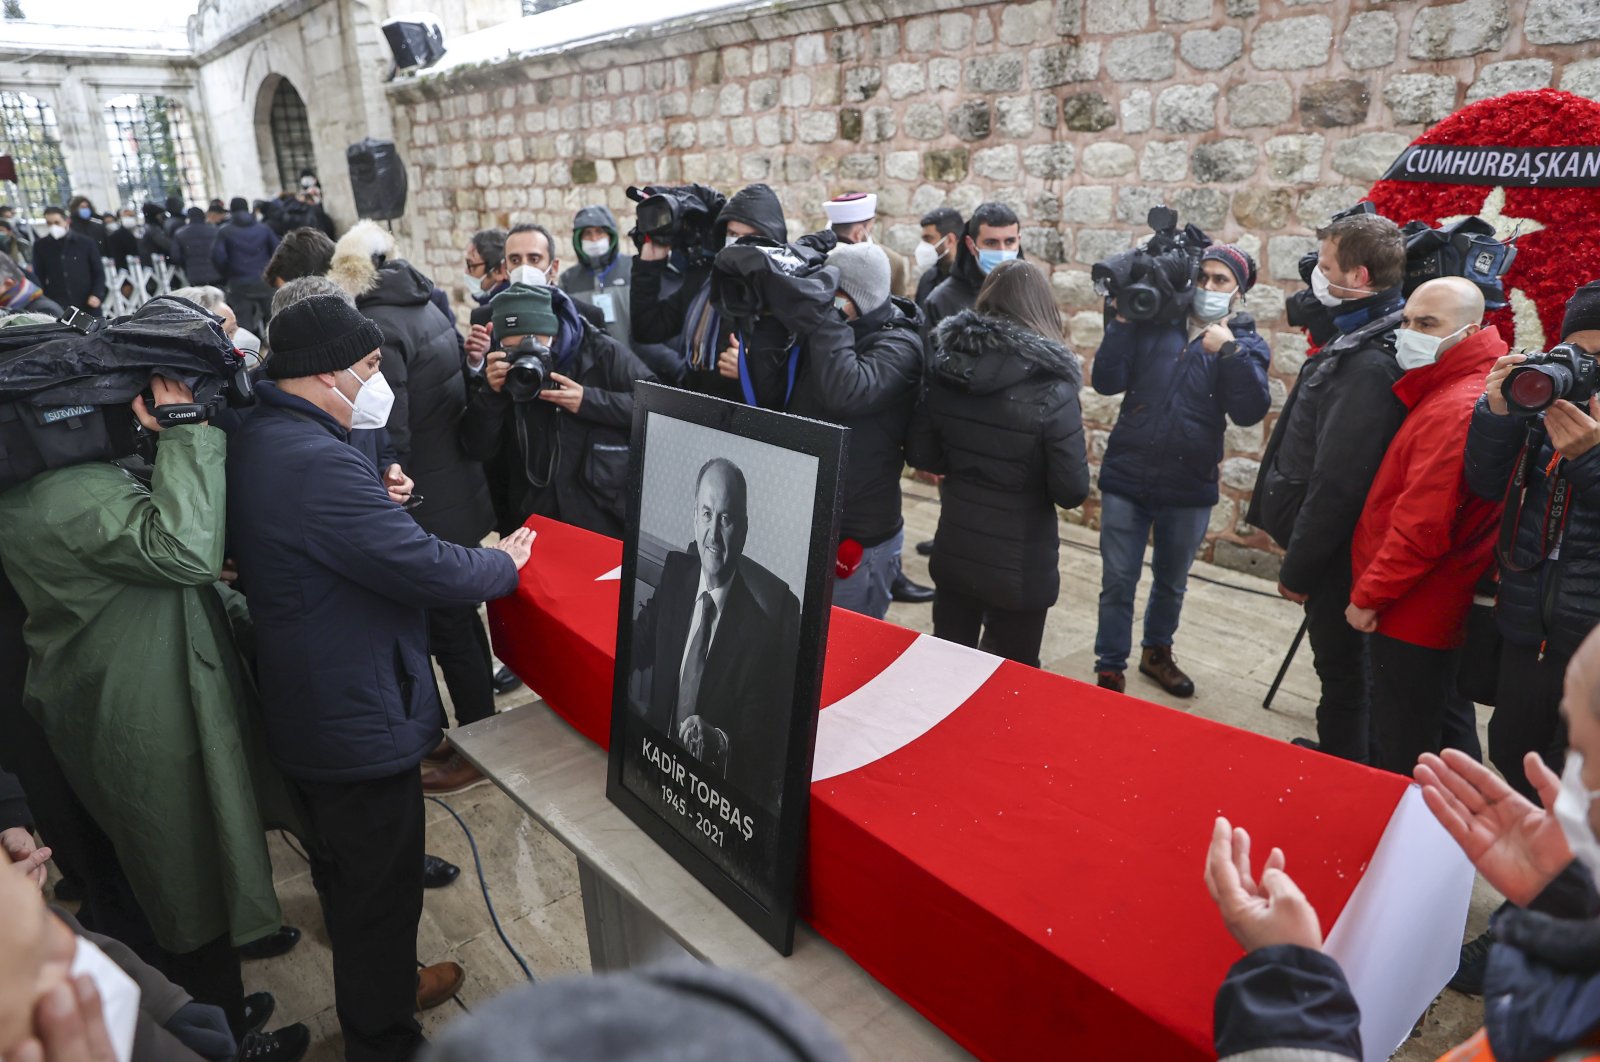 People pray by the coffin of Kadir Topbaş, next to which a photo of the late mayor was placed, in Istanbul, Turkey, Feb. 14, 2021. (AA PHOTO)